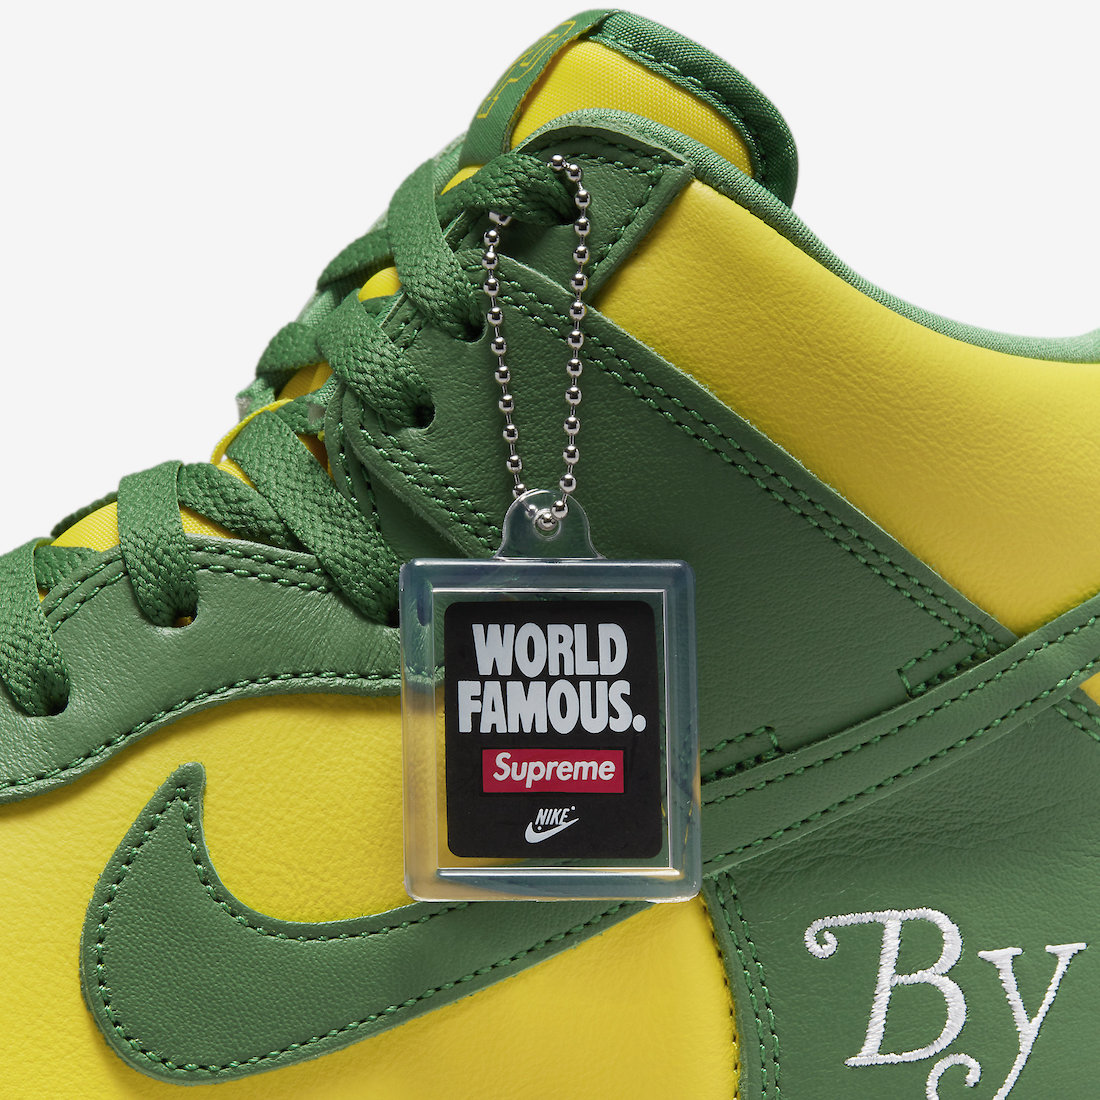 Nike SB Dunk High x Supreme By Any Means Brazil – FunkyInsole